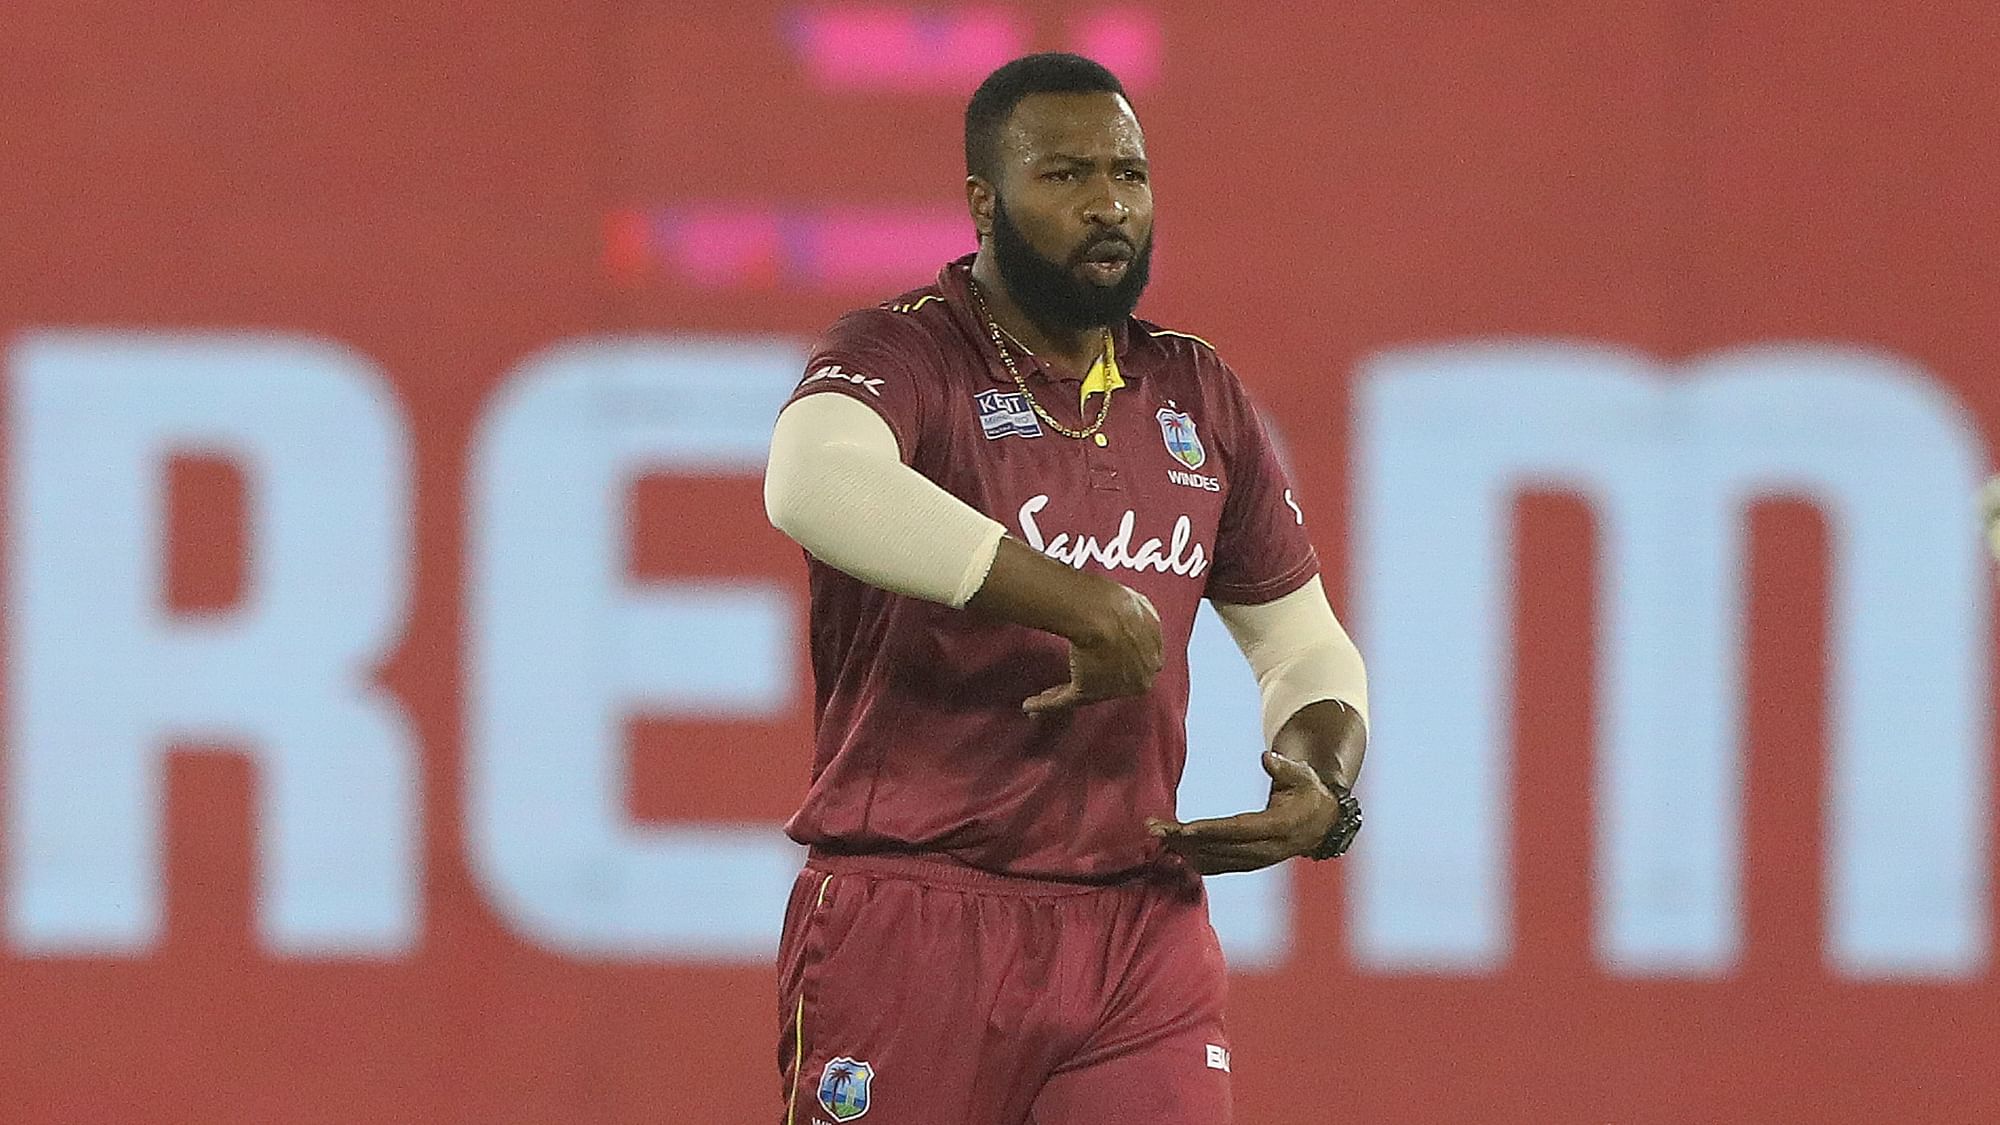 Kieron Pollard hailed the batting performances along with the efforts of the likes of Sheldon Cottrell with the ball.